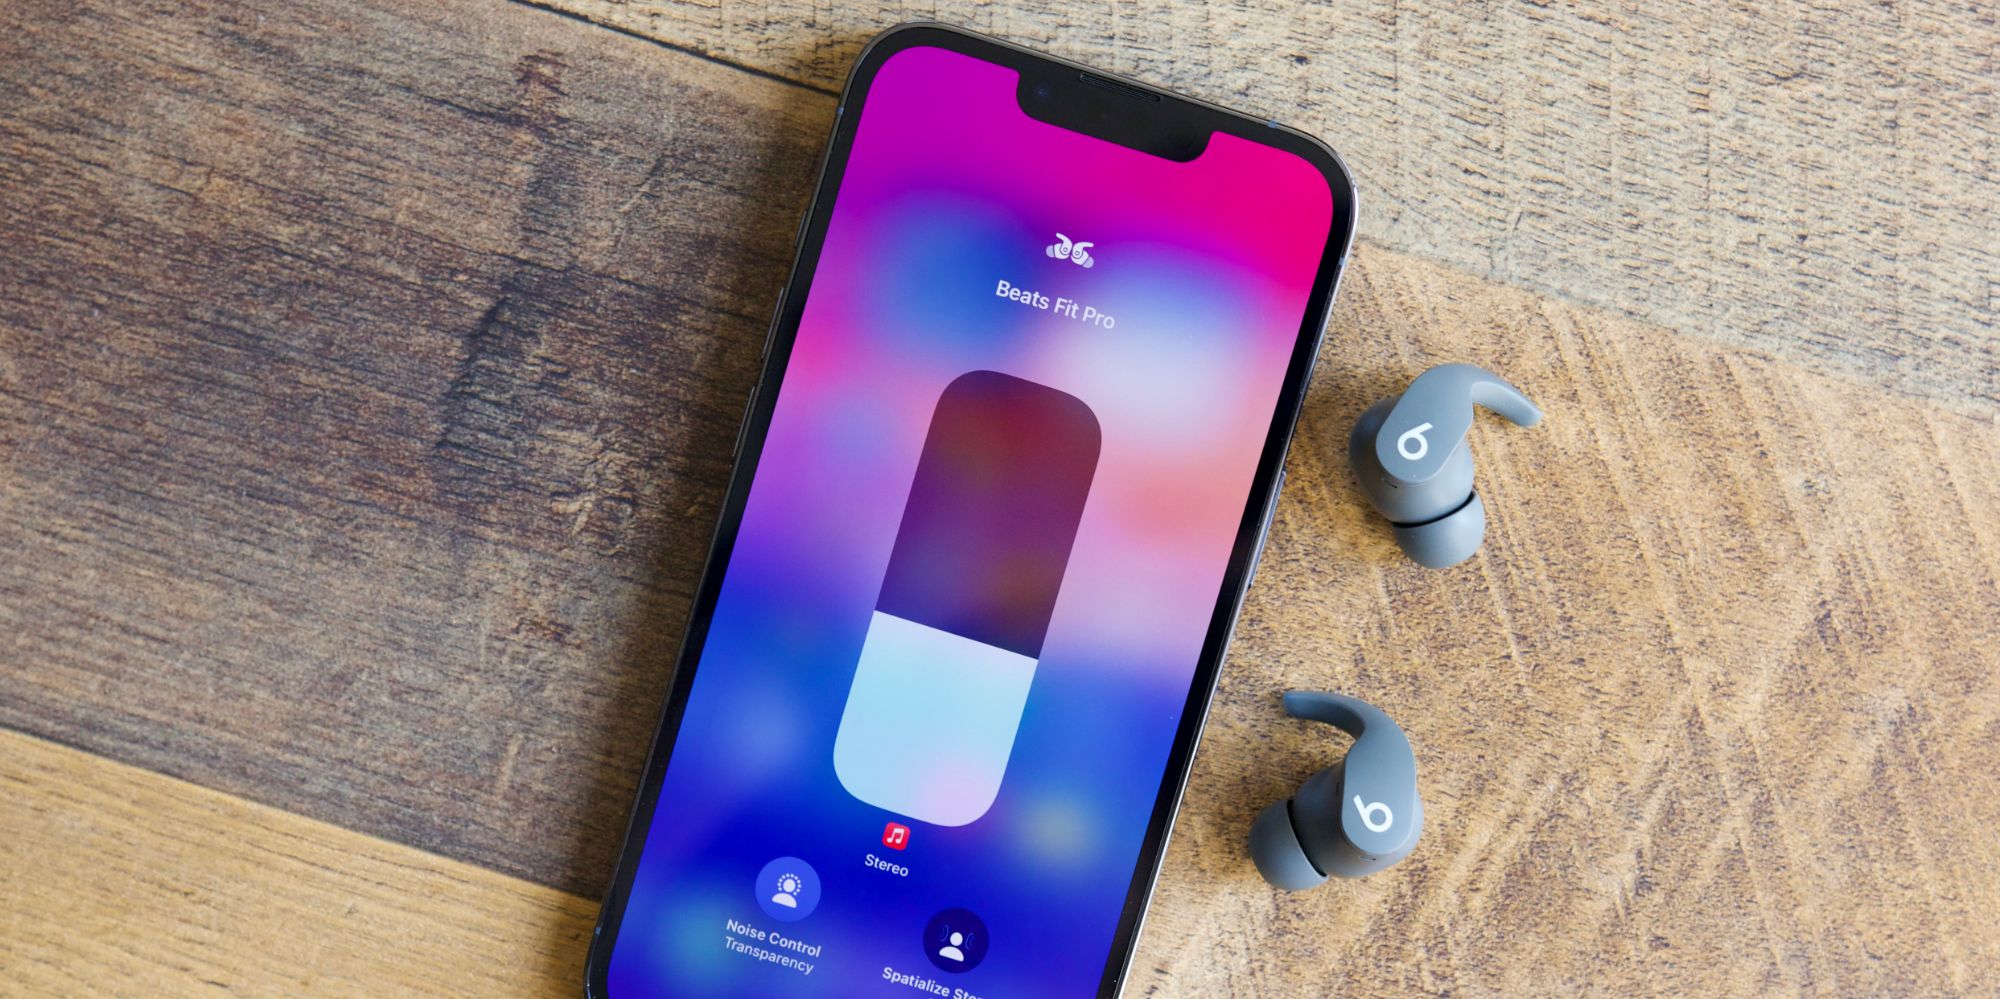 Beats Fit Pro Vs. Galaxy Buds Pro: Which 0 Pro Earbuds Should You Buy?